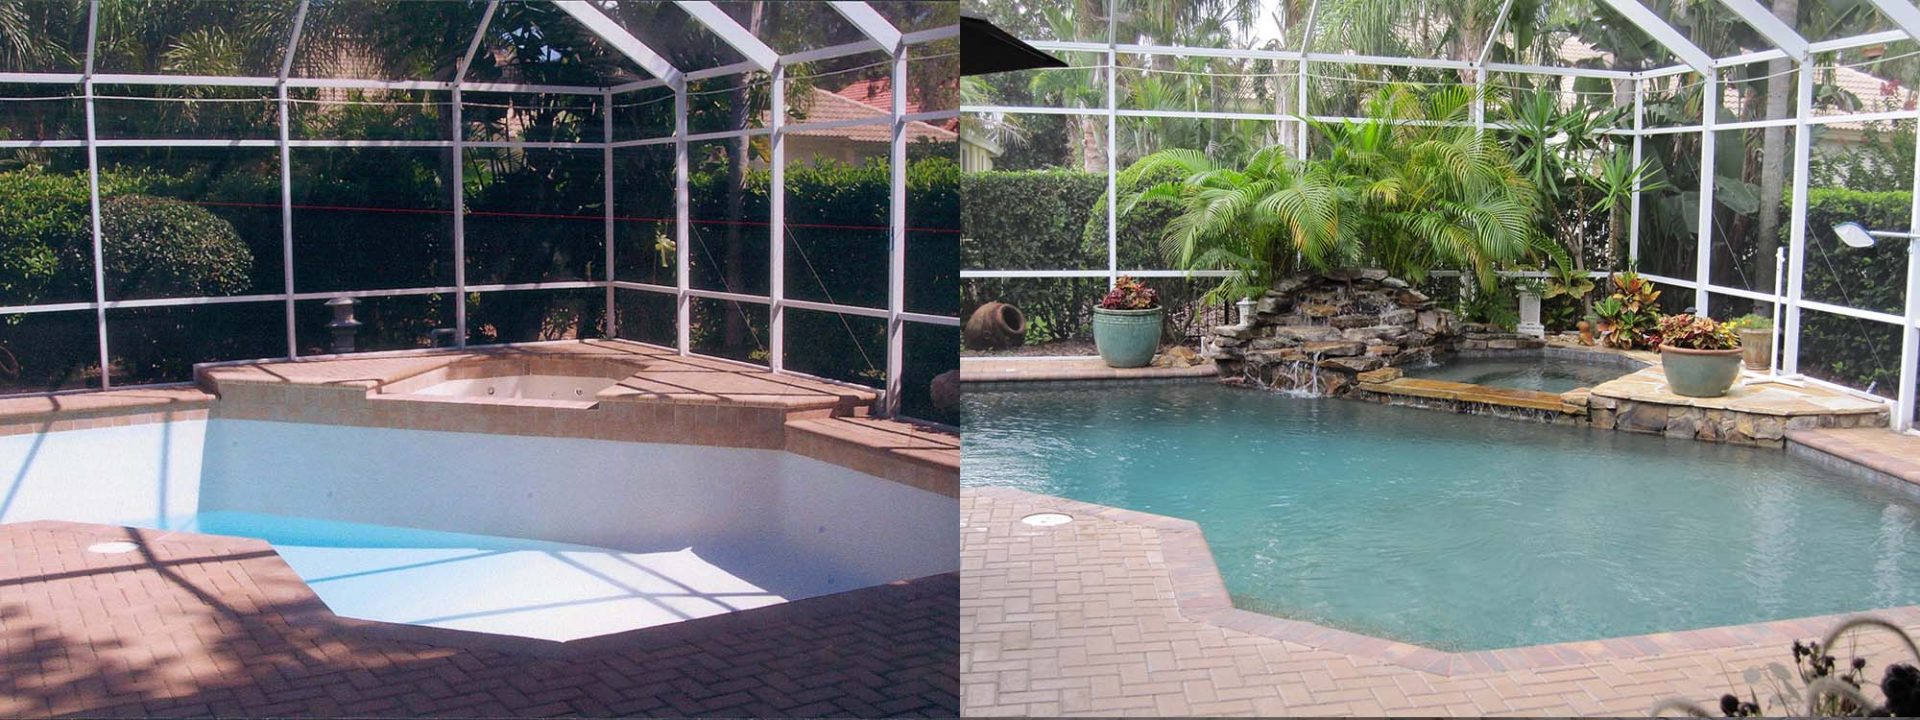 Custom Pool Remodel Before and After by Waterscapes Inc.